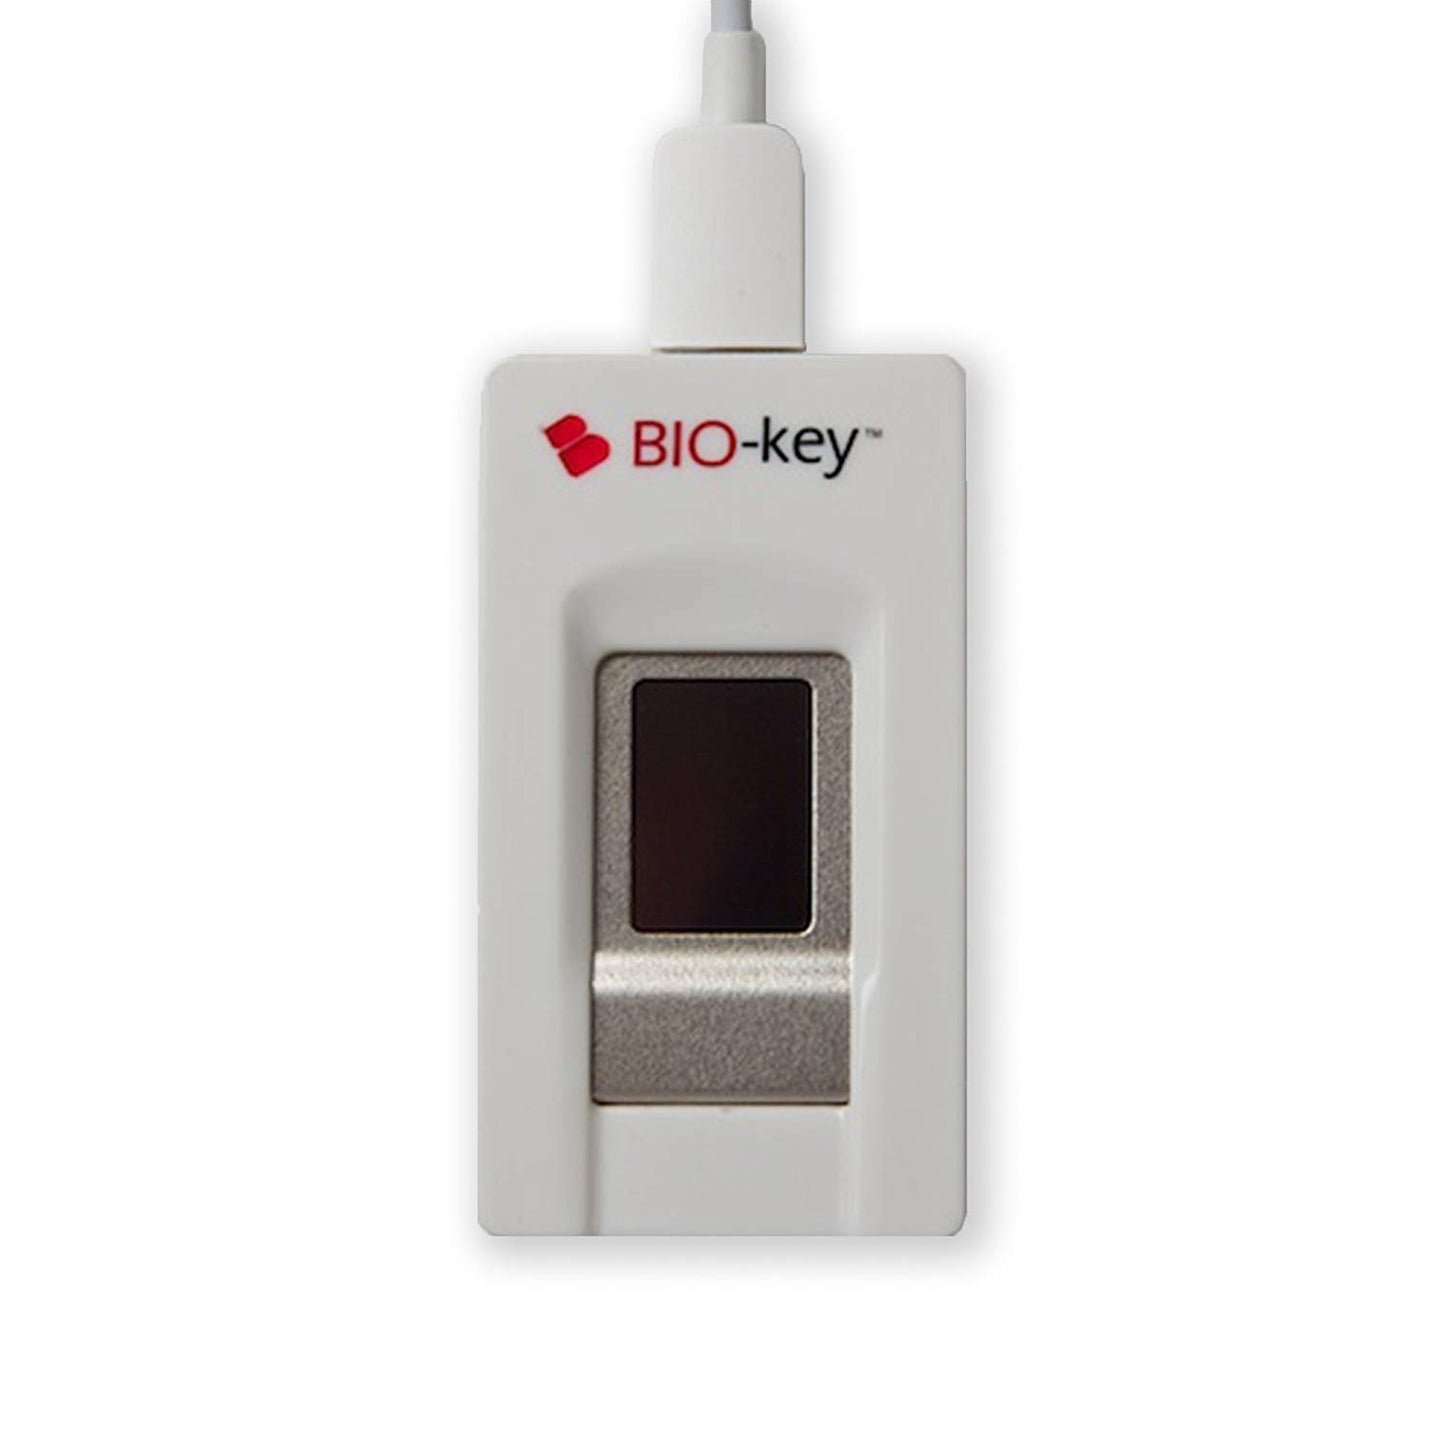 BIO-key EcoID Fingerprint Reader - Tested & Qualified by Microsoft for Windows Hello - Eliminate Passwords on Windows 7/8.1/10 - Includes OmniPass Online Password Vault with Purchase